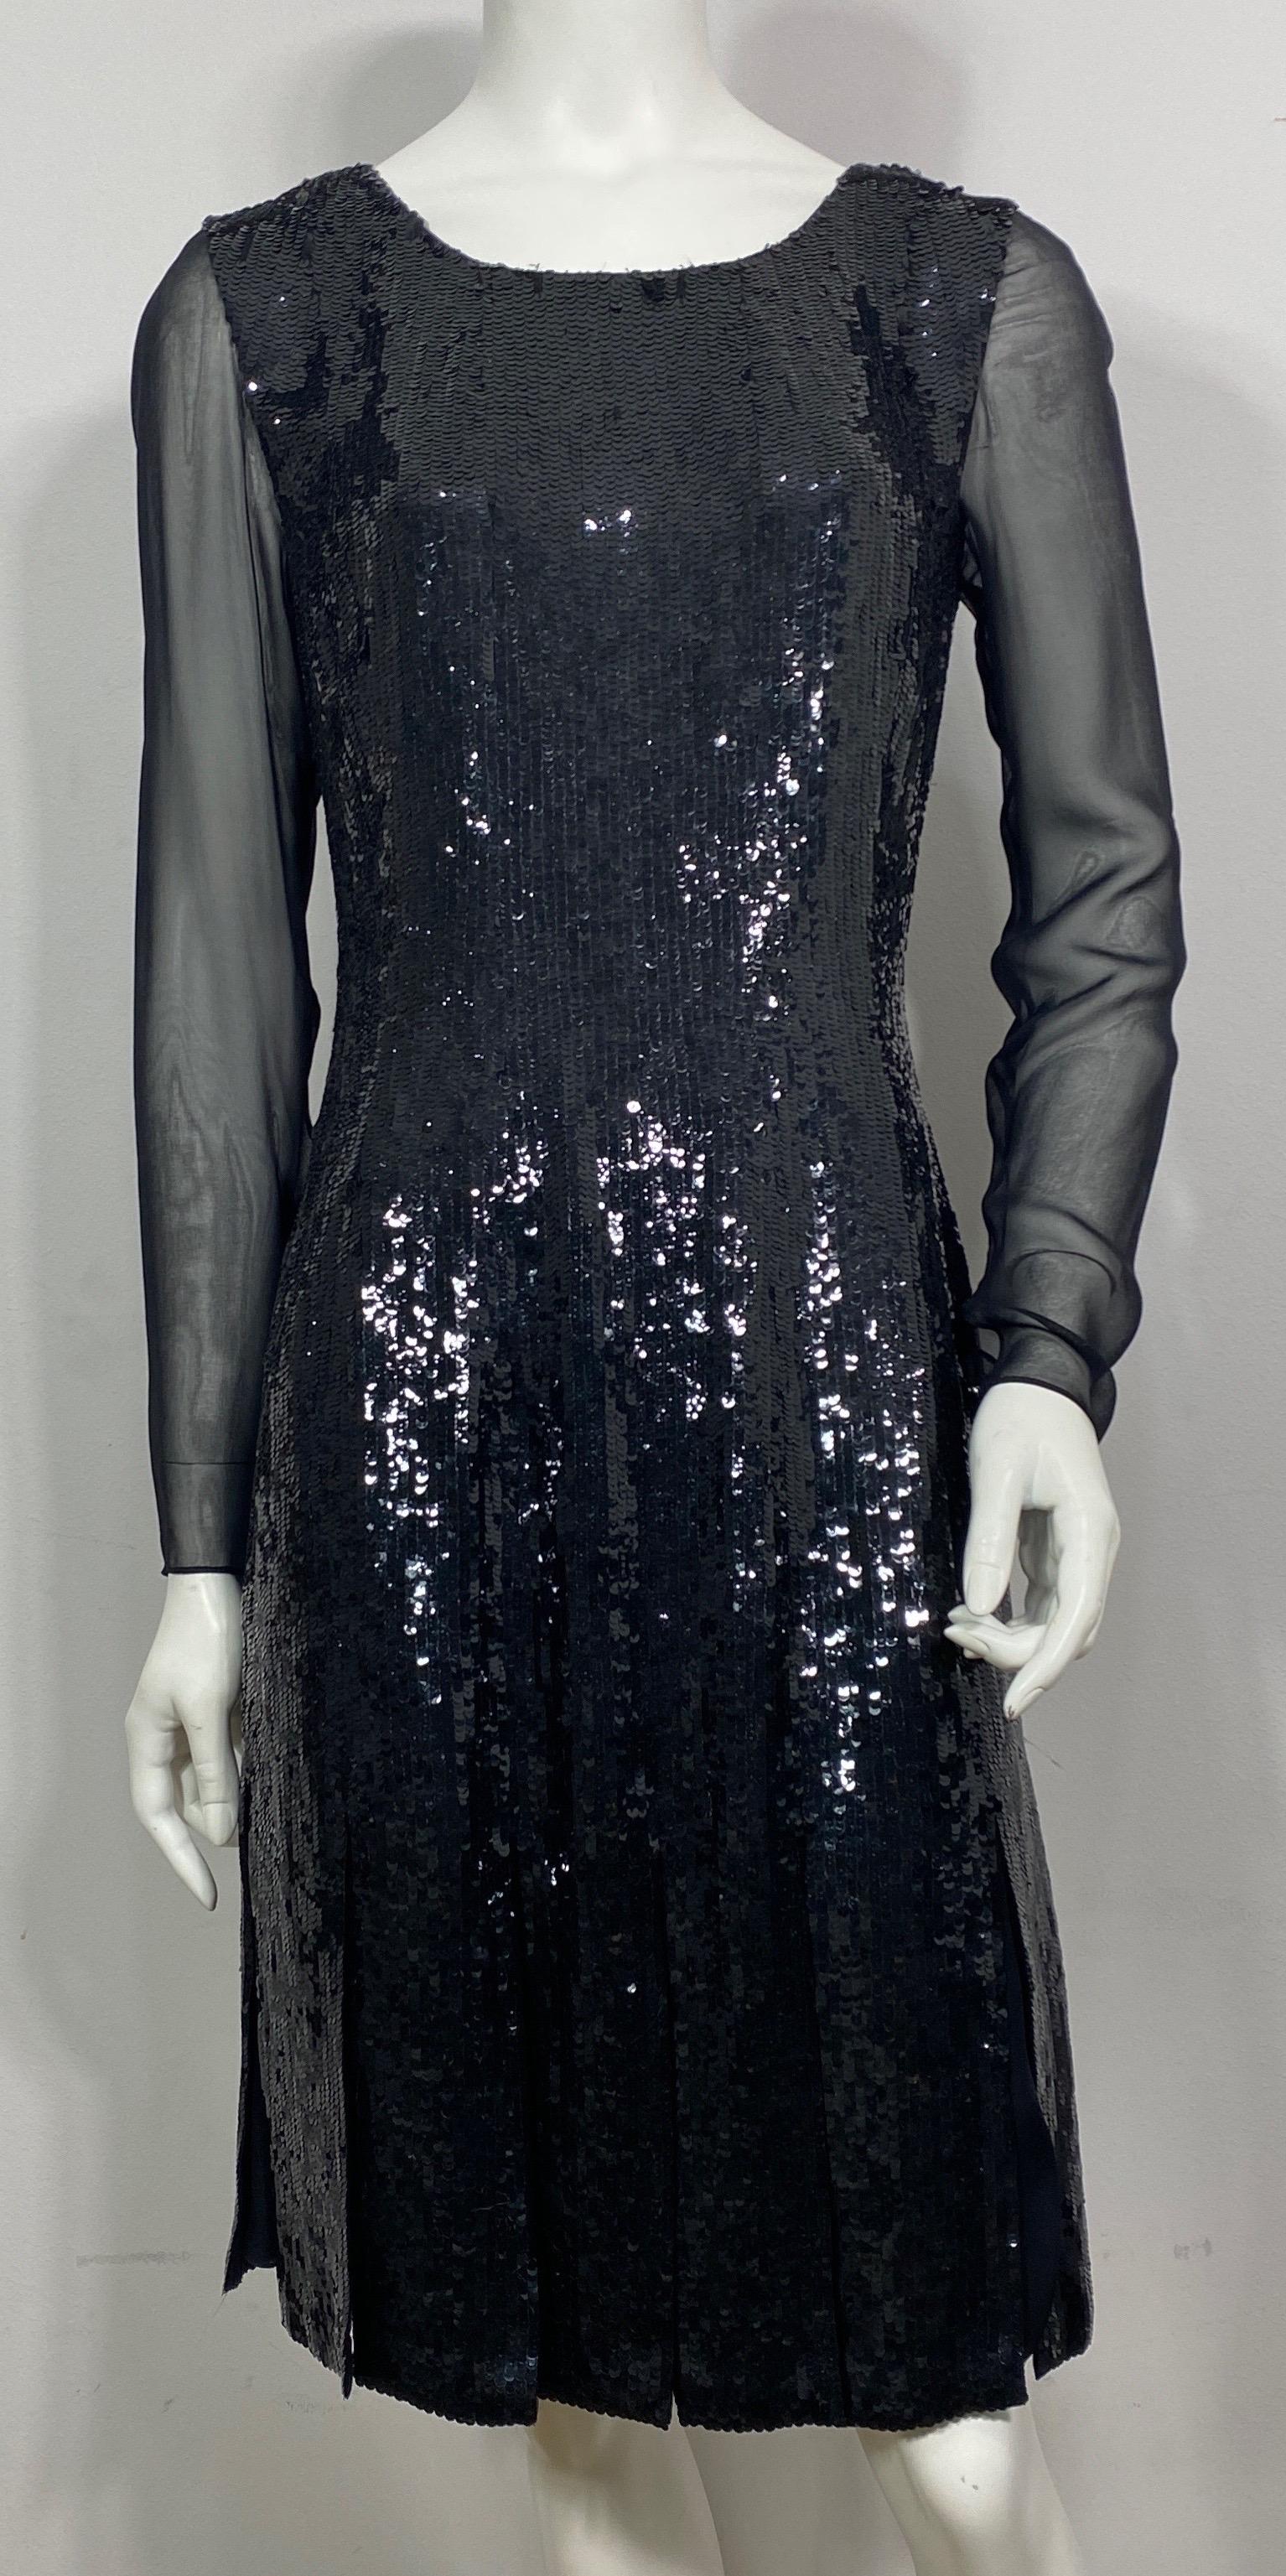 Oscar de La Renta Runway RTW Fall 2012 Black Sequin Car Wash Pleat Dress-Size 8  This Oscar creation is a perfect mix of elegance and femininity. The dress is lined in a black silk chiffon and the sleeves are made of same with a black gem button